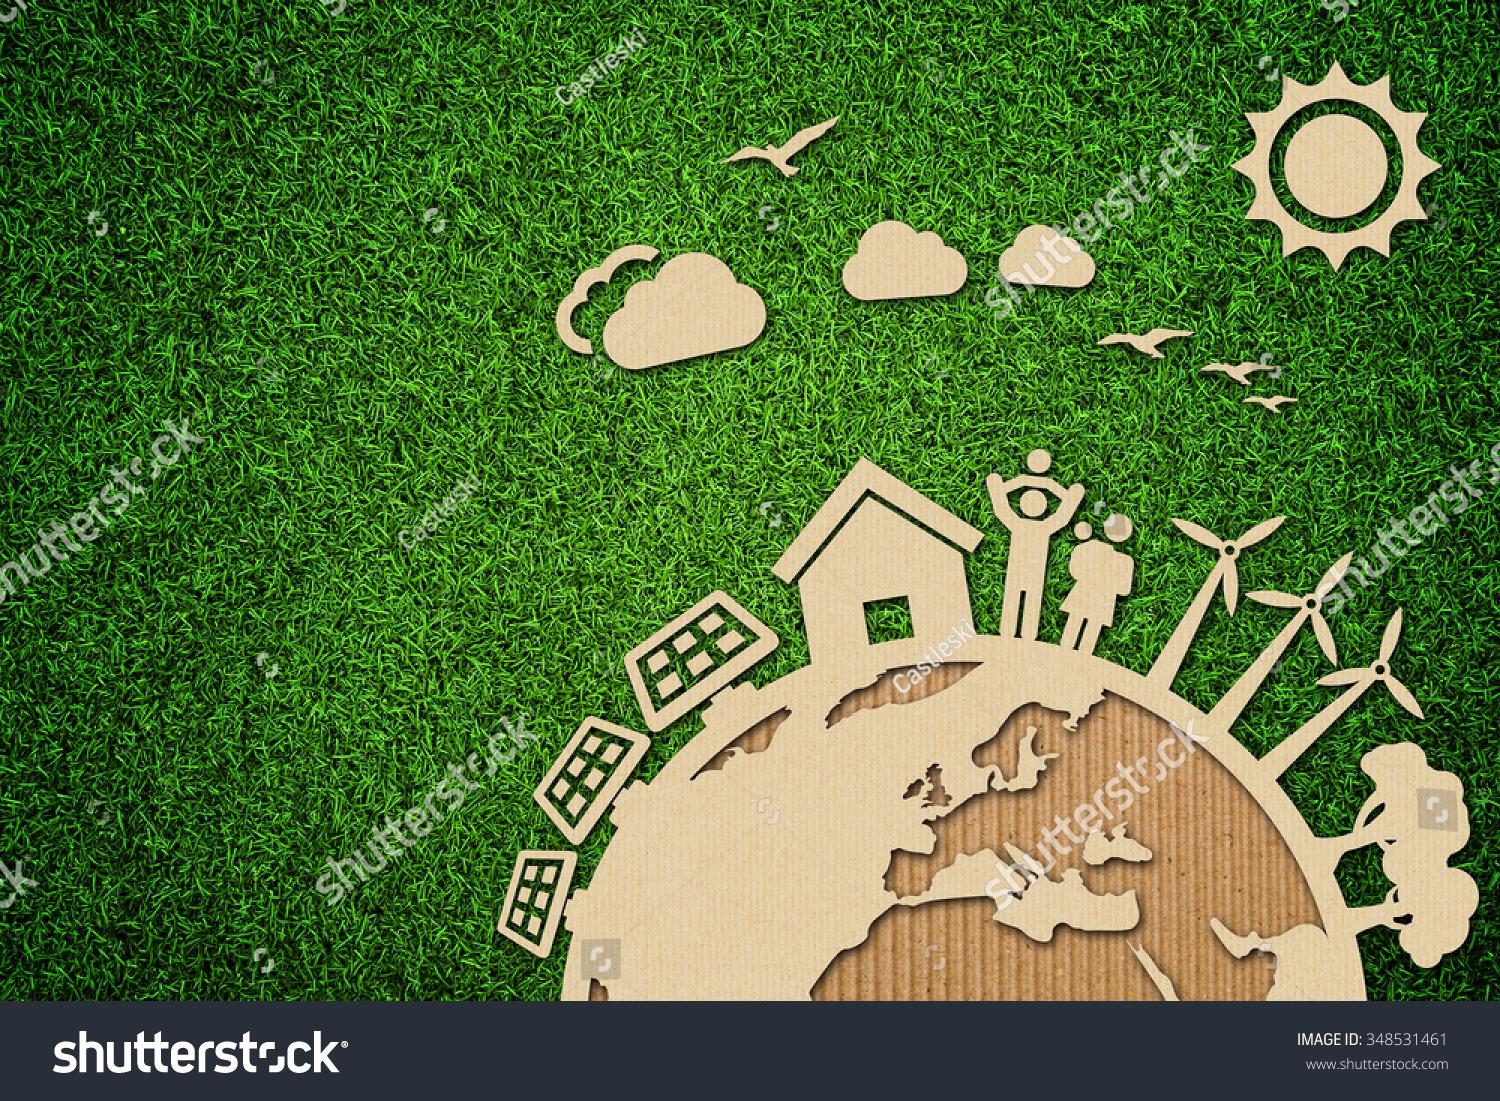 Environmental green energy concept illustration with cardboard cut out on grass. #348531461